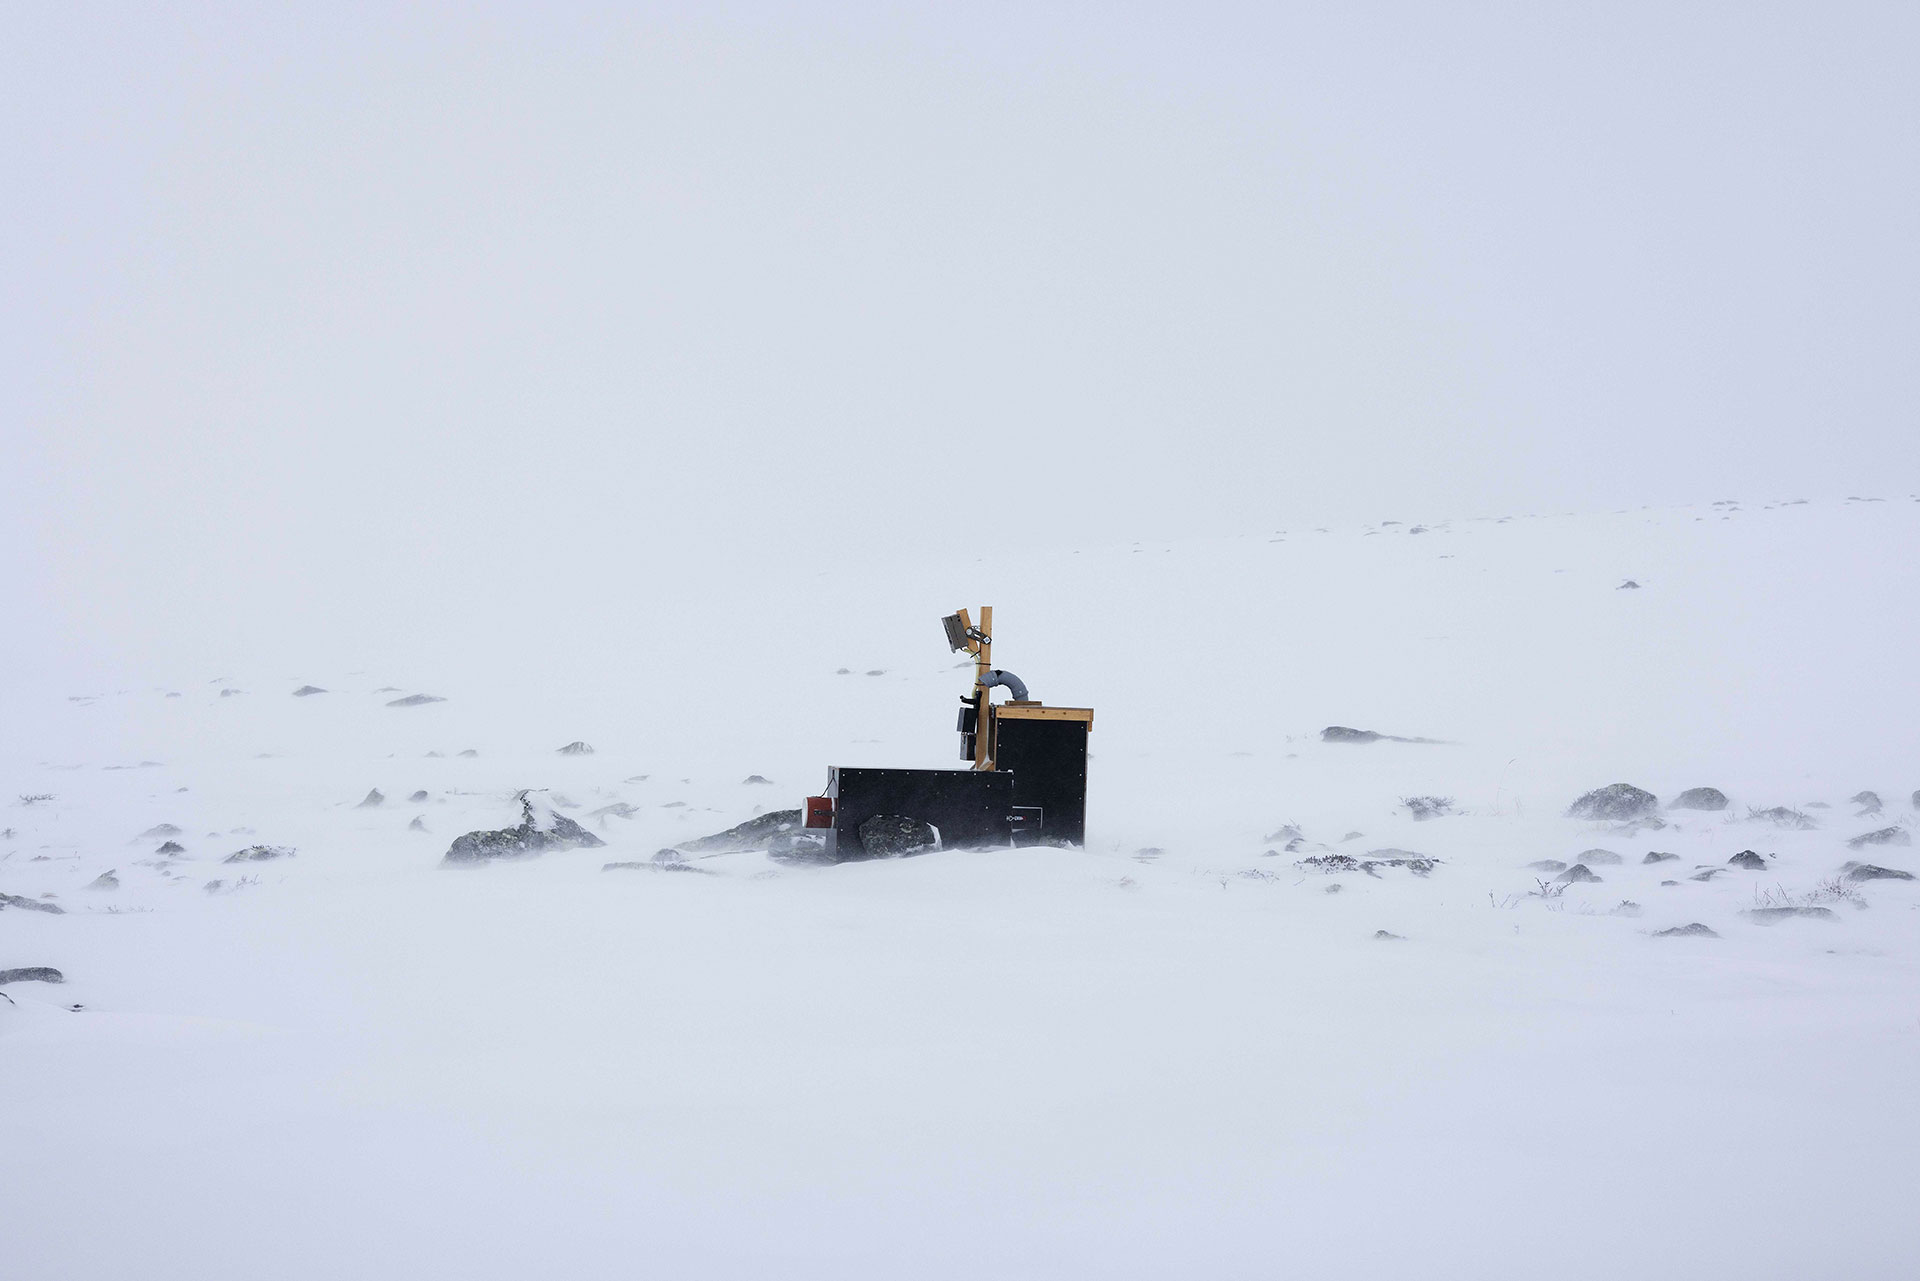 Arctic fox feeding station set in the middle of the snow